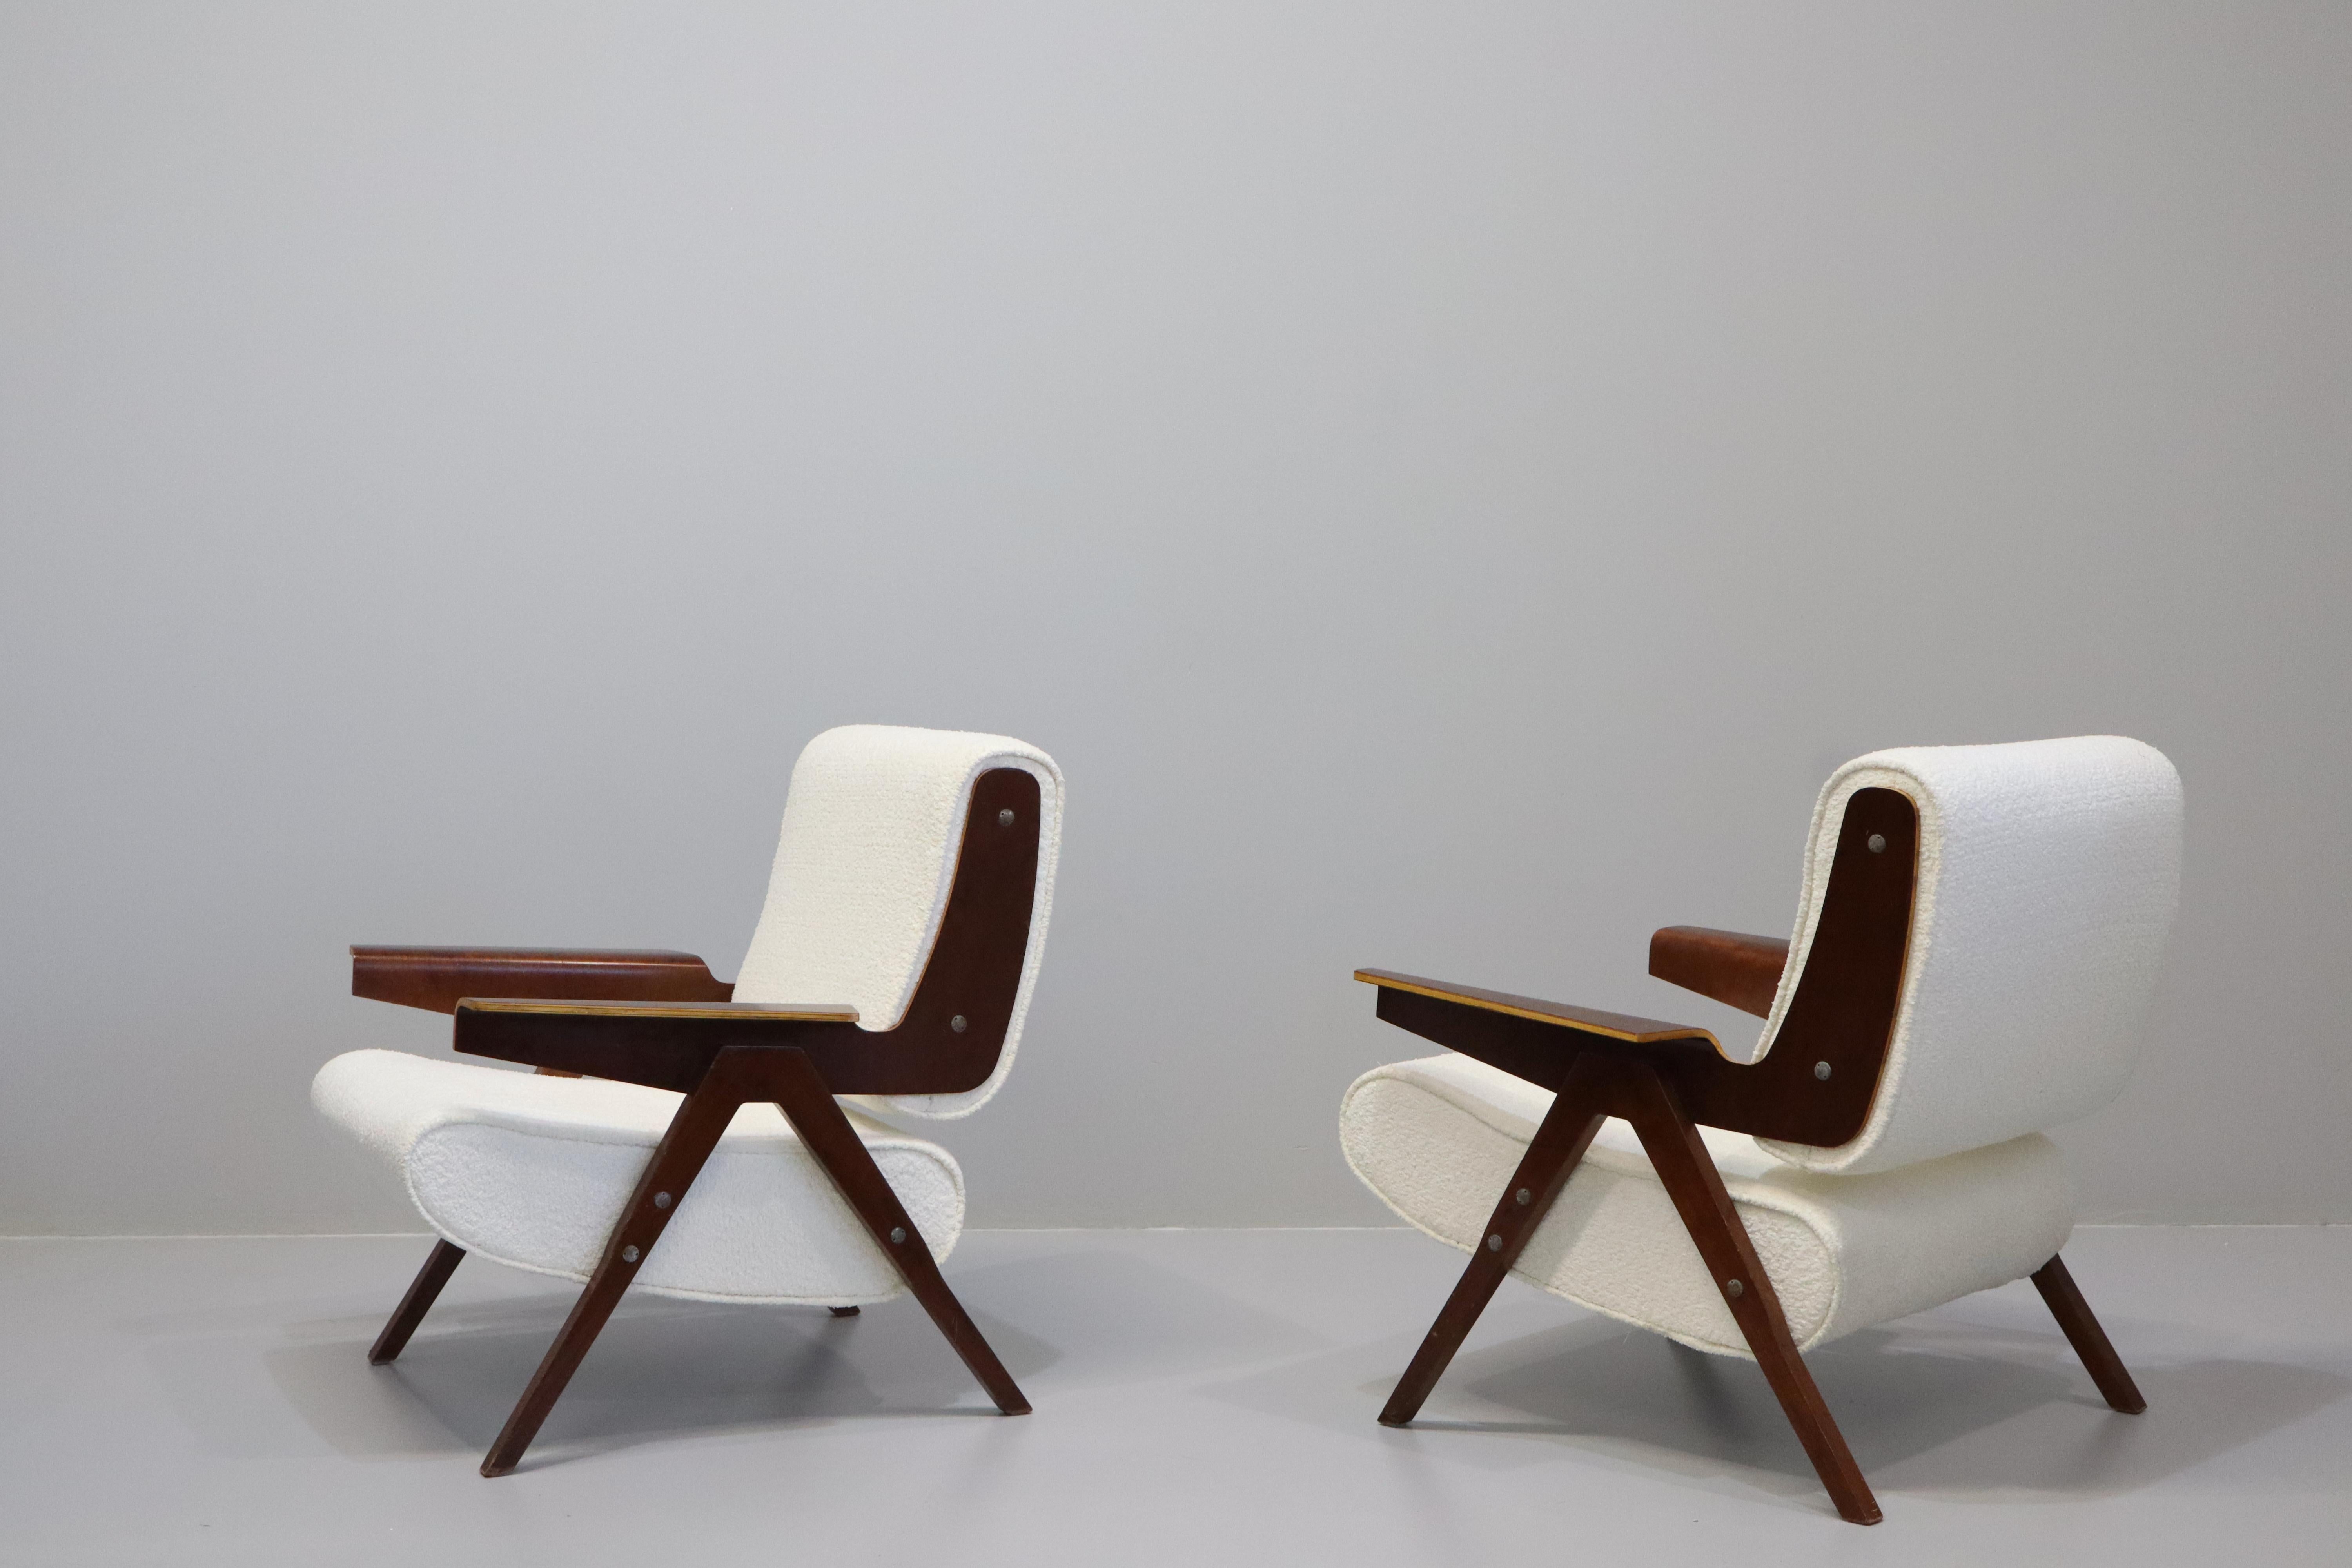 Mid-20th Century Pair Of Gianfranco Frattini Model 831 Lounge Chairs For Cassina, 1950s For Sale